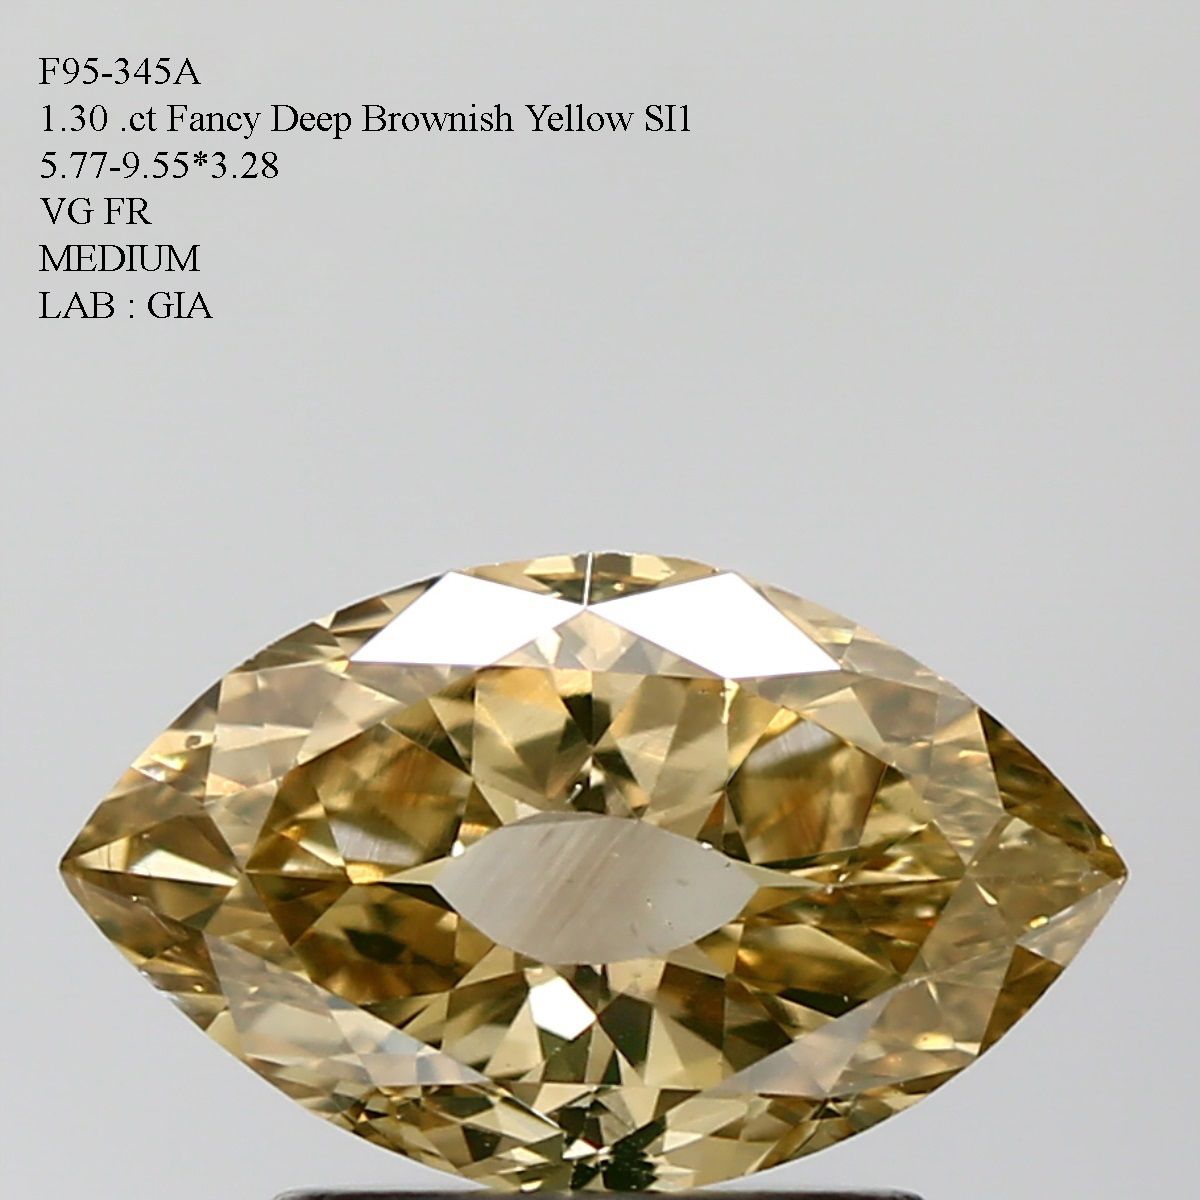 1.30 Carat Marquise Loose Diamond, Fancy Deep Brownish Yellow, SI1, Excellent, GIA Certified